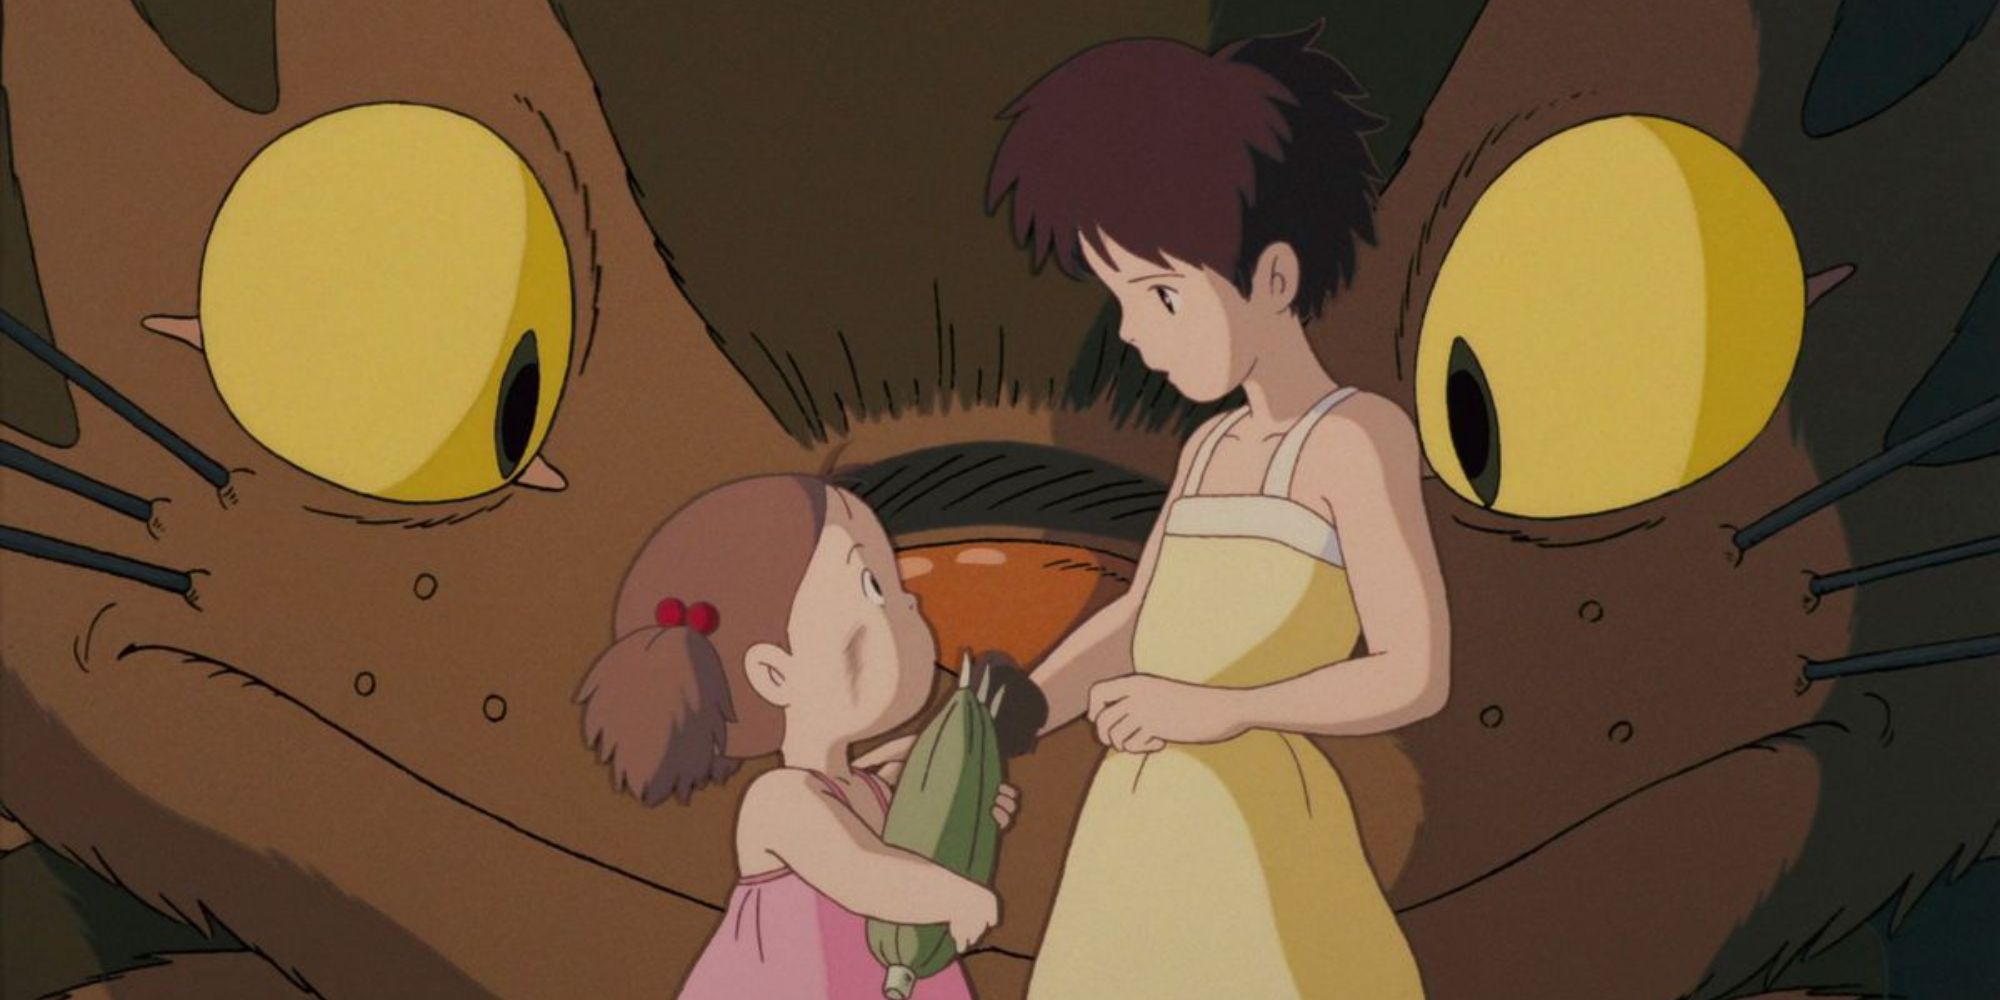 Mei Kusakabe and Satsuki talking while a giant cat-like creature stands behind them in My Neighbor Totoro